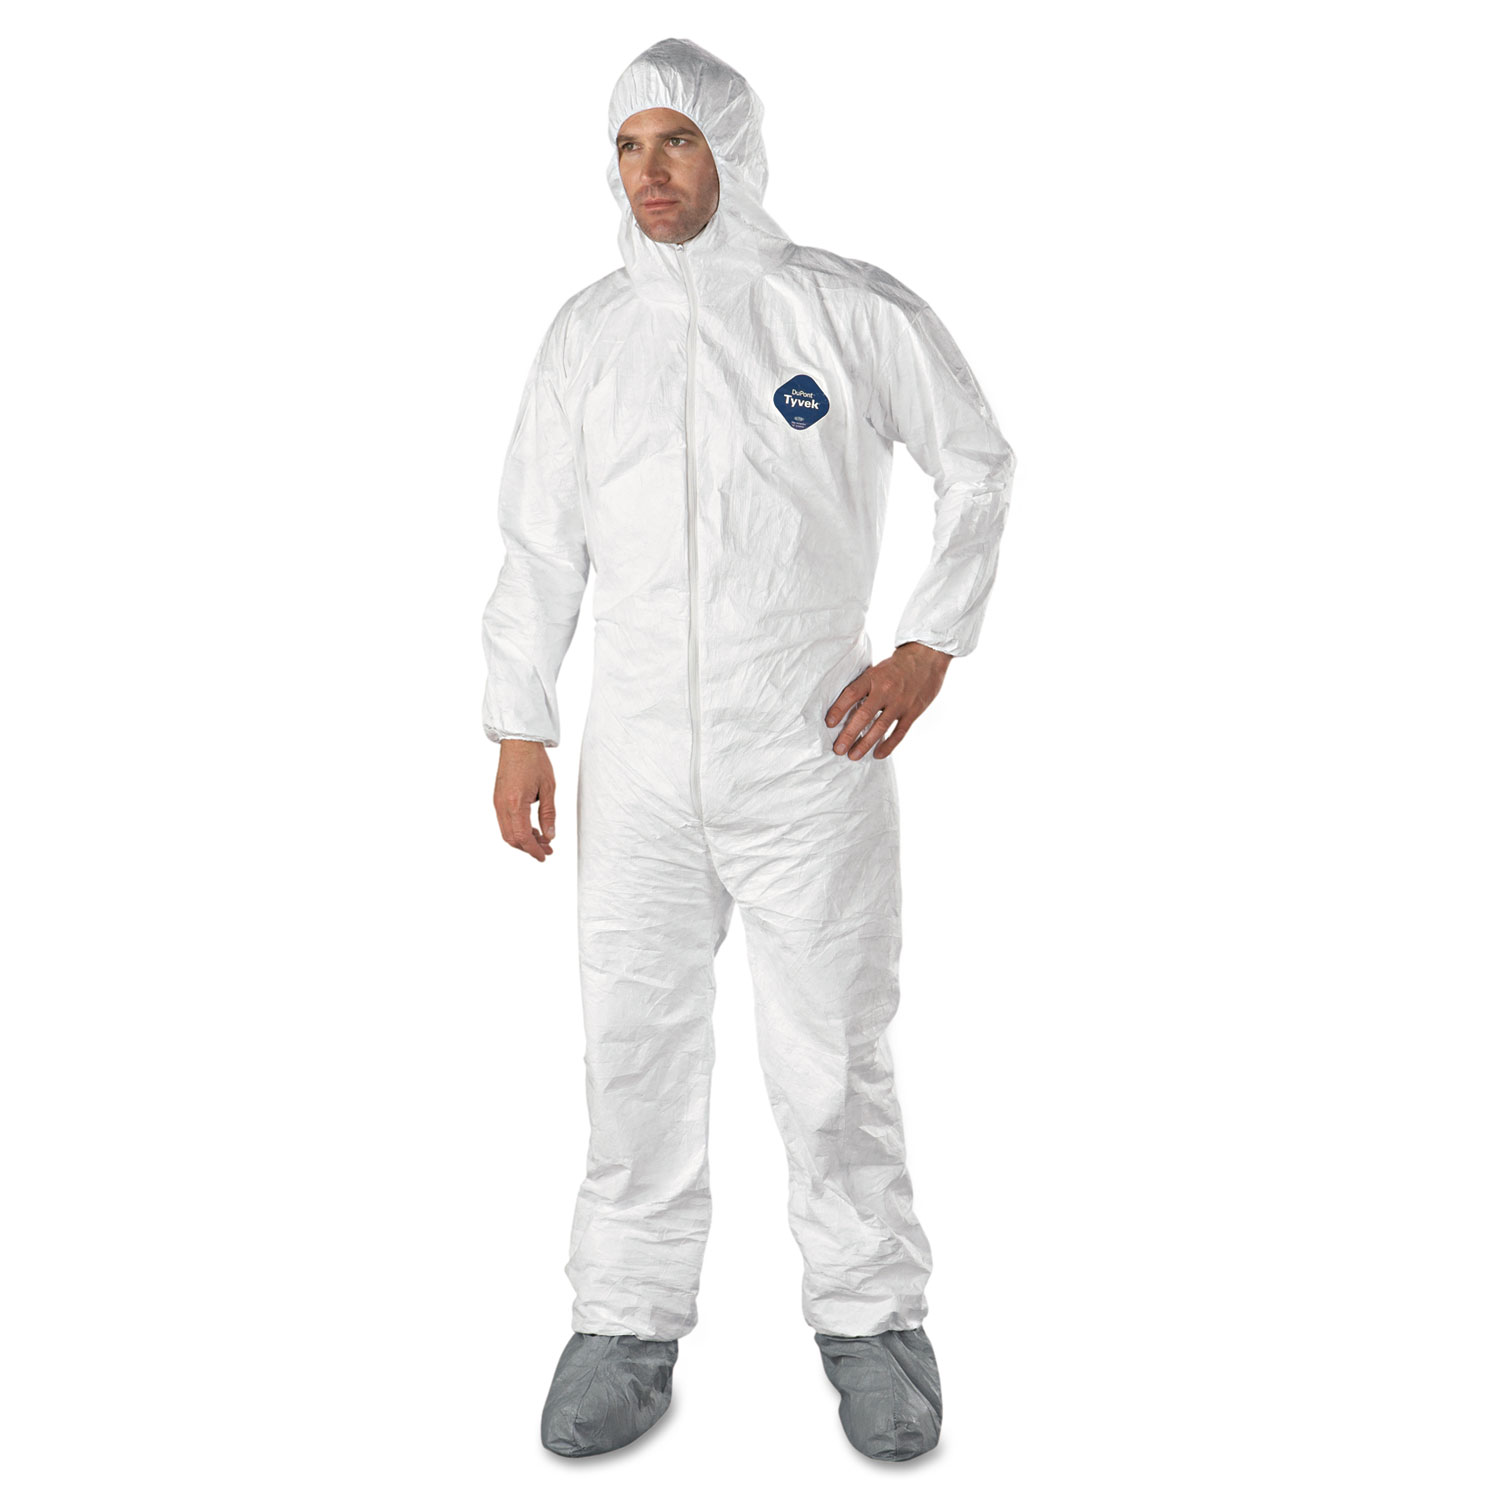  DuPont TY122SWH2X002500 Tyvek Elastic-Cuff Hooded Coveralls w/Boots, White, 2X-Large, 25/Carton (DUPTY122S2XL) 